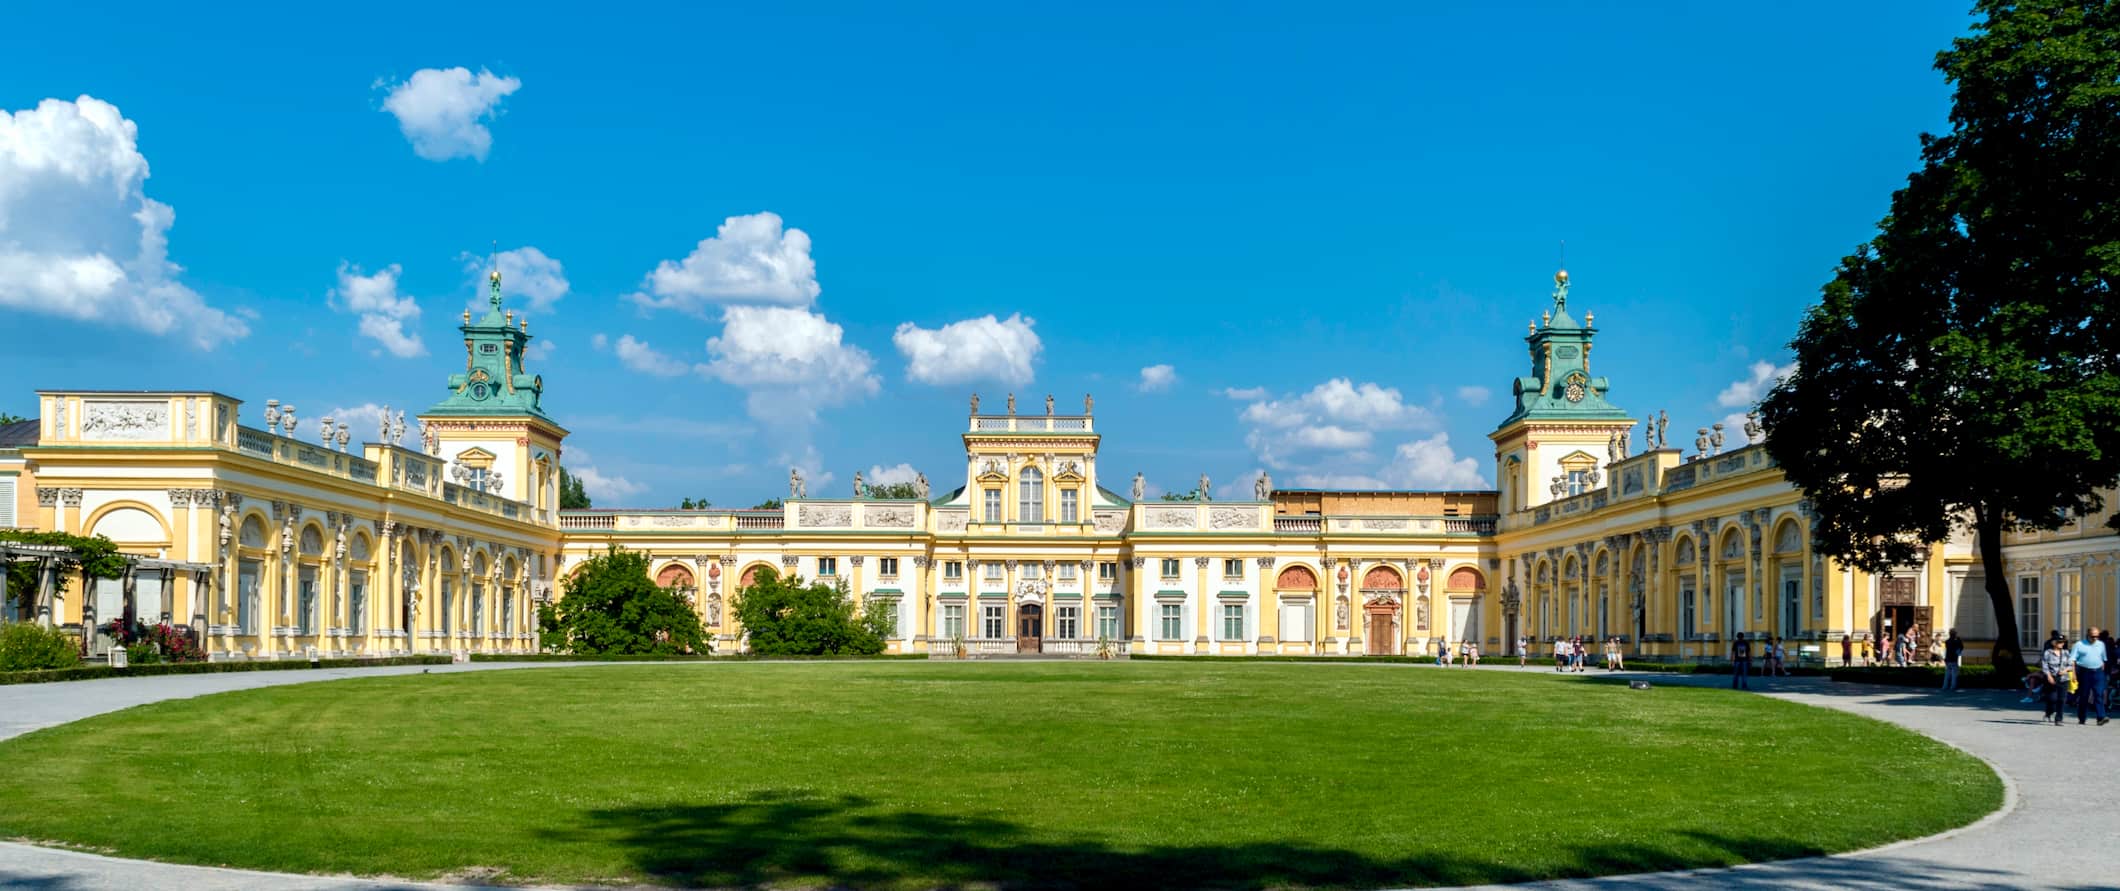 A wide, regal palace surrounding by green grass on a sunny day in Warsaw, Poland